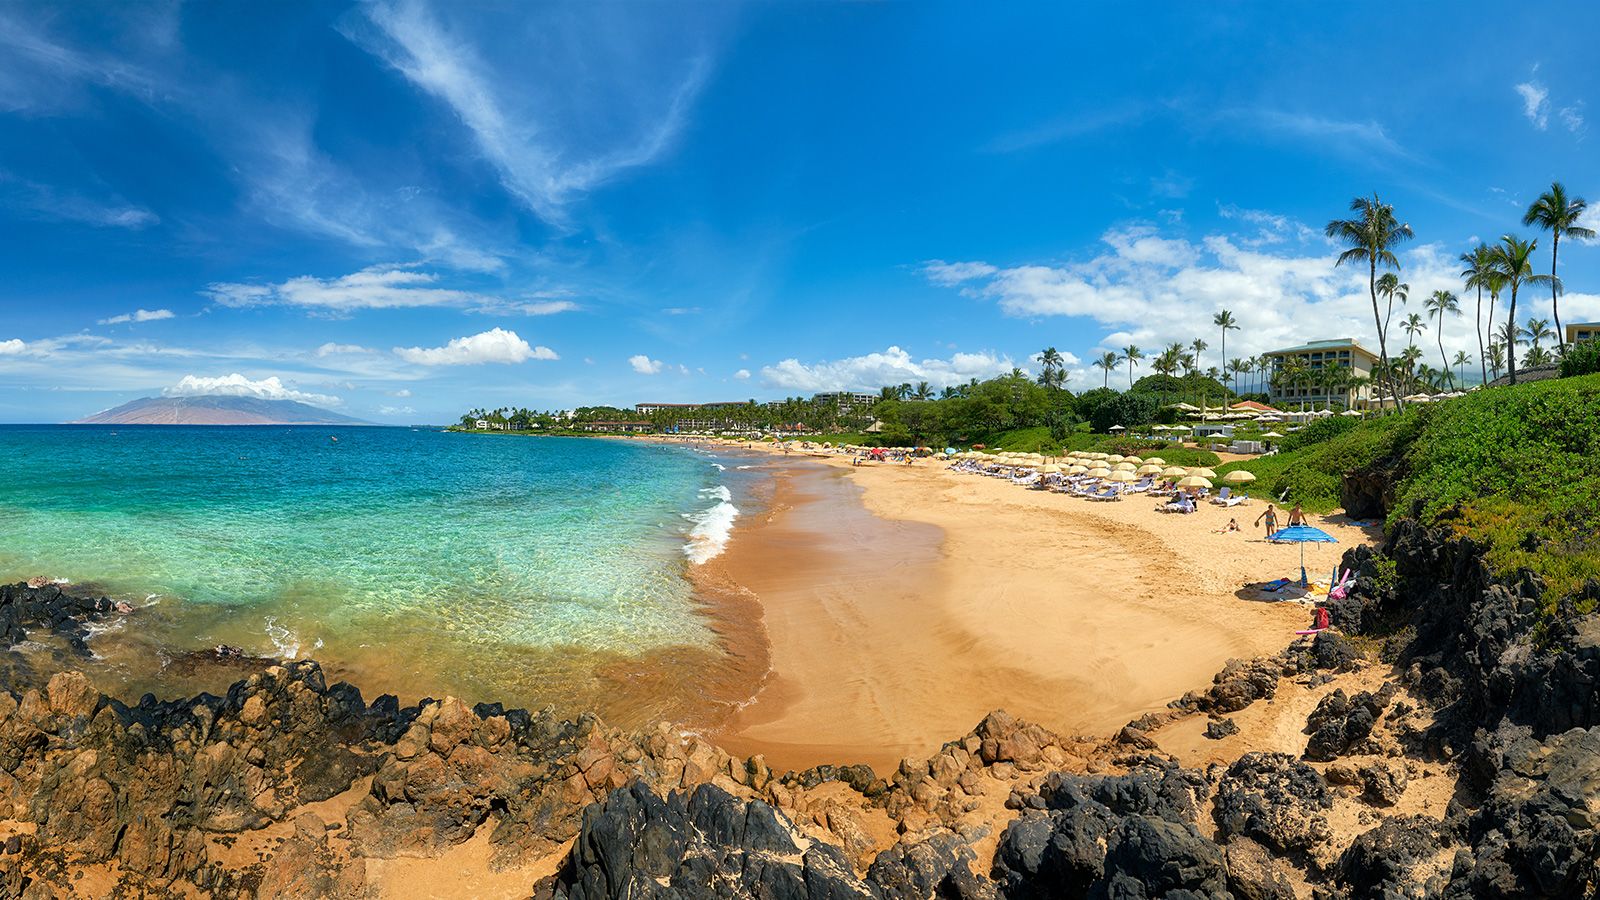 <strong>8. Wailea Beach, Maui, Hawaii: </strong>A series of five pocket beaches, Wailea Beach is lined with resorts. It's a great snorkeling beach when the water is calm, Dr. Beach says.